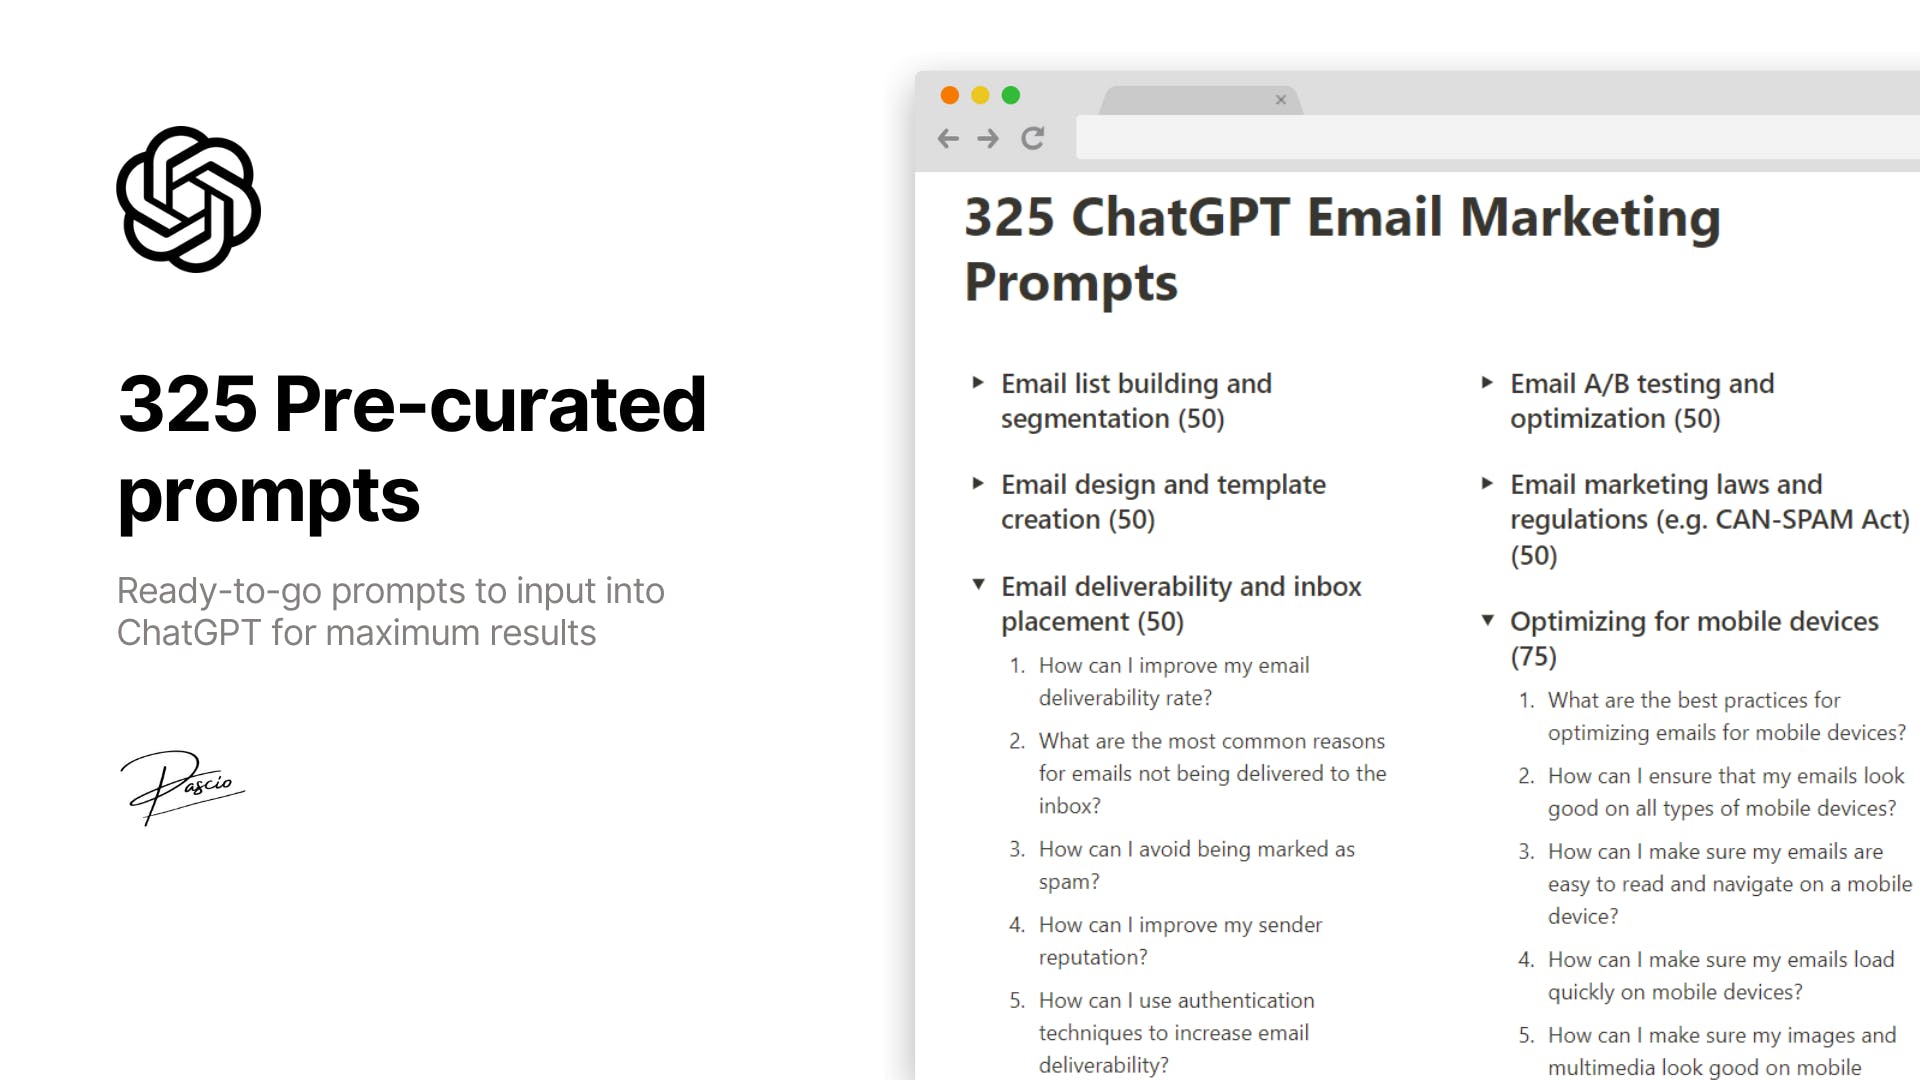 500 ChatGPT Email Marketing Prompts Pack media 2